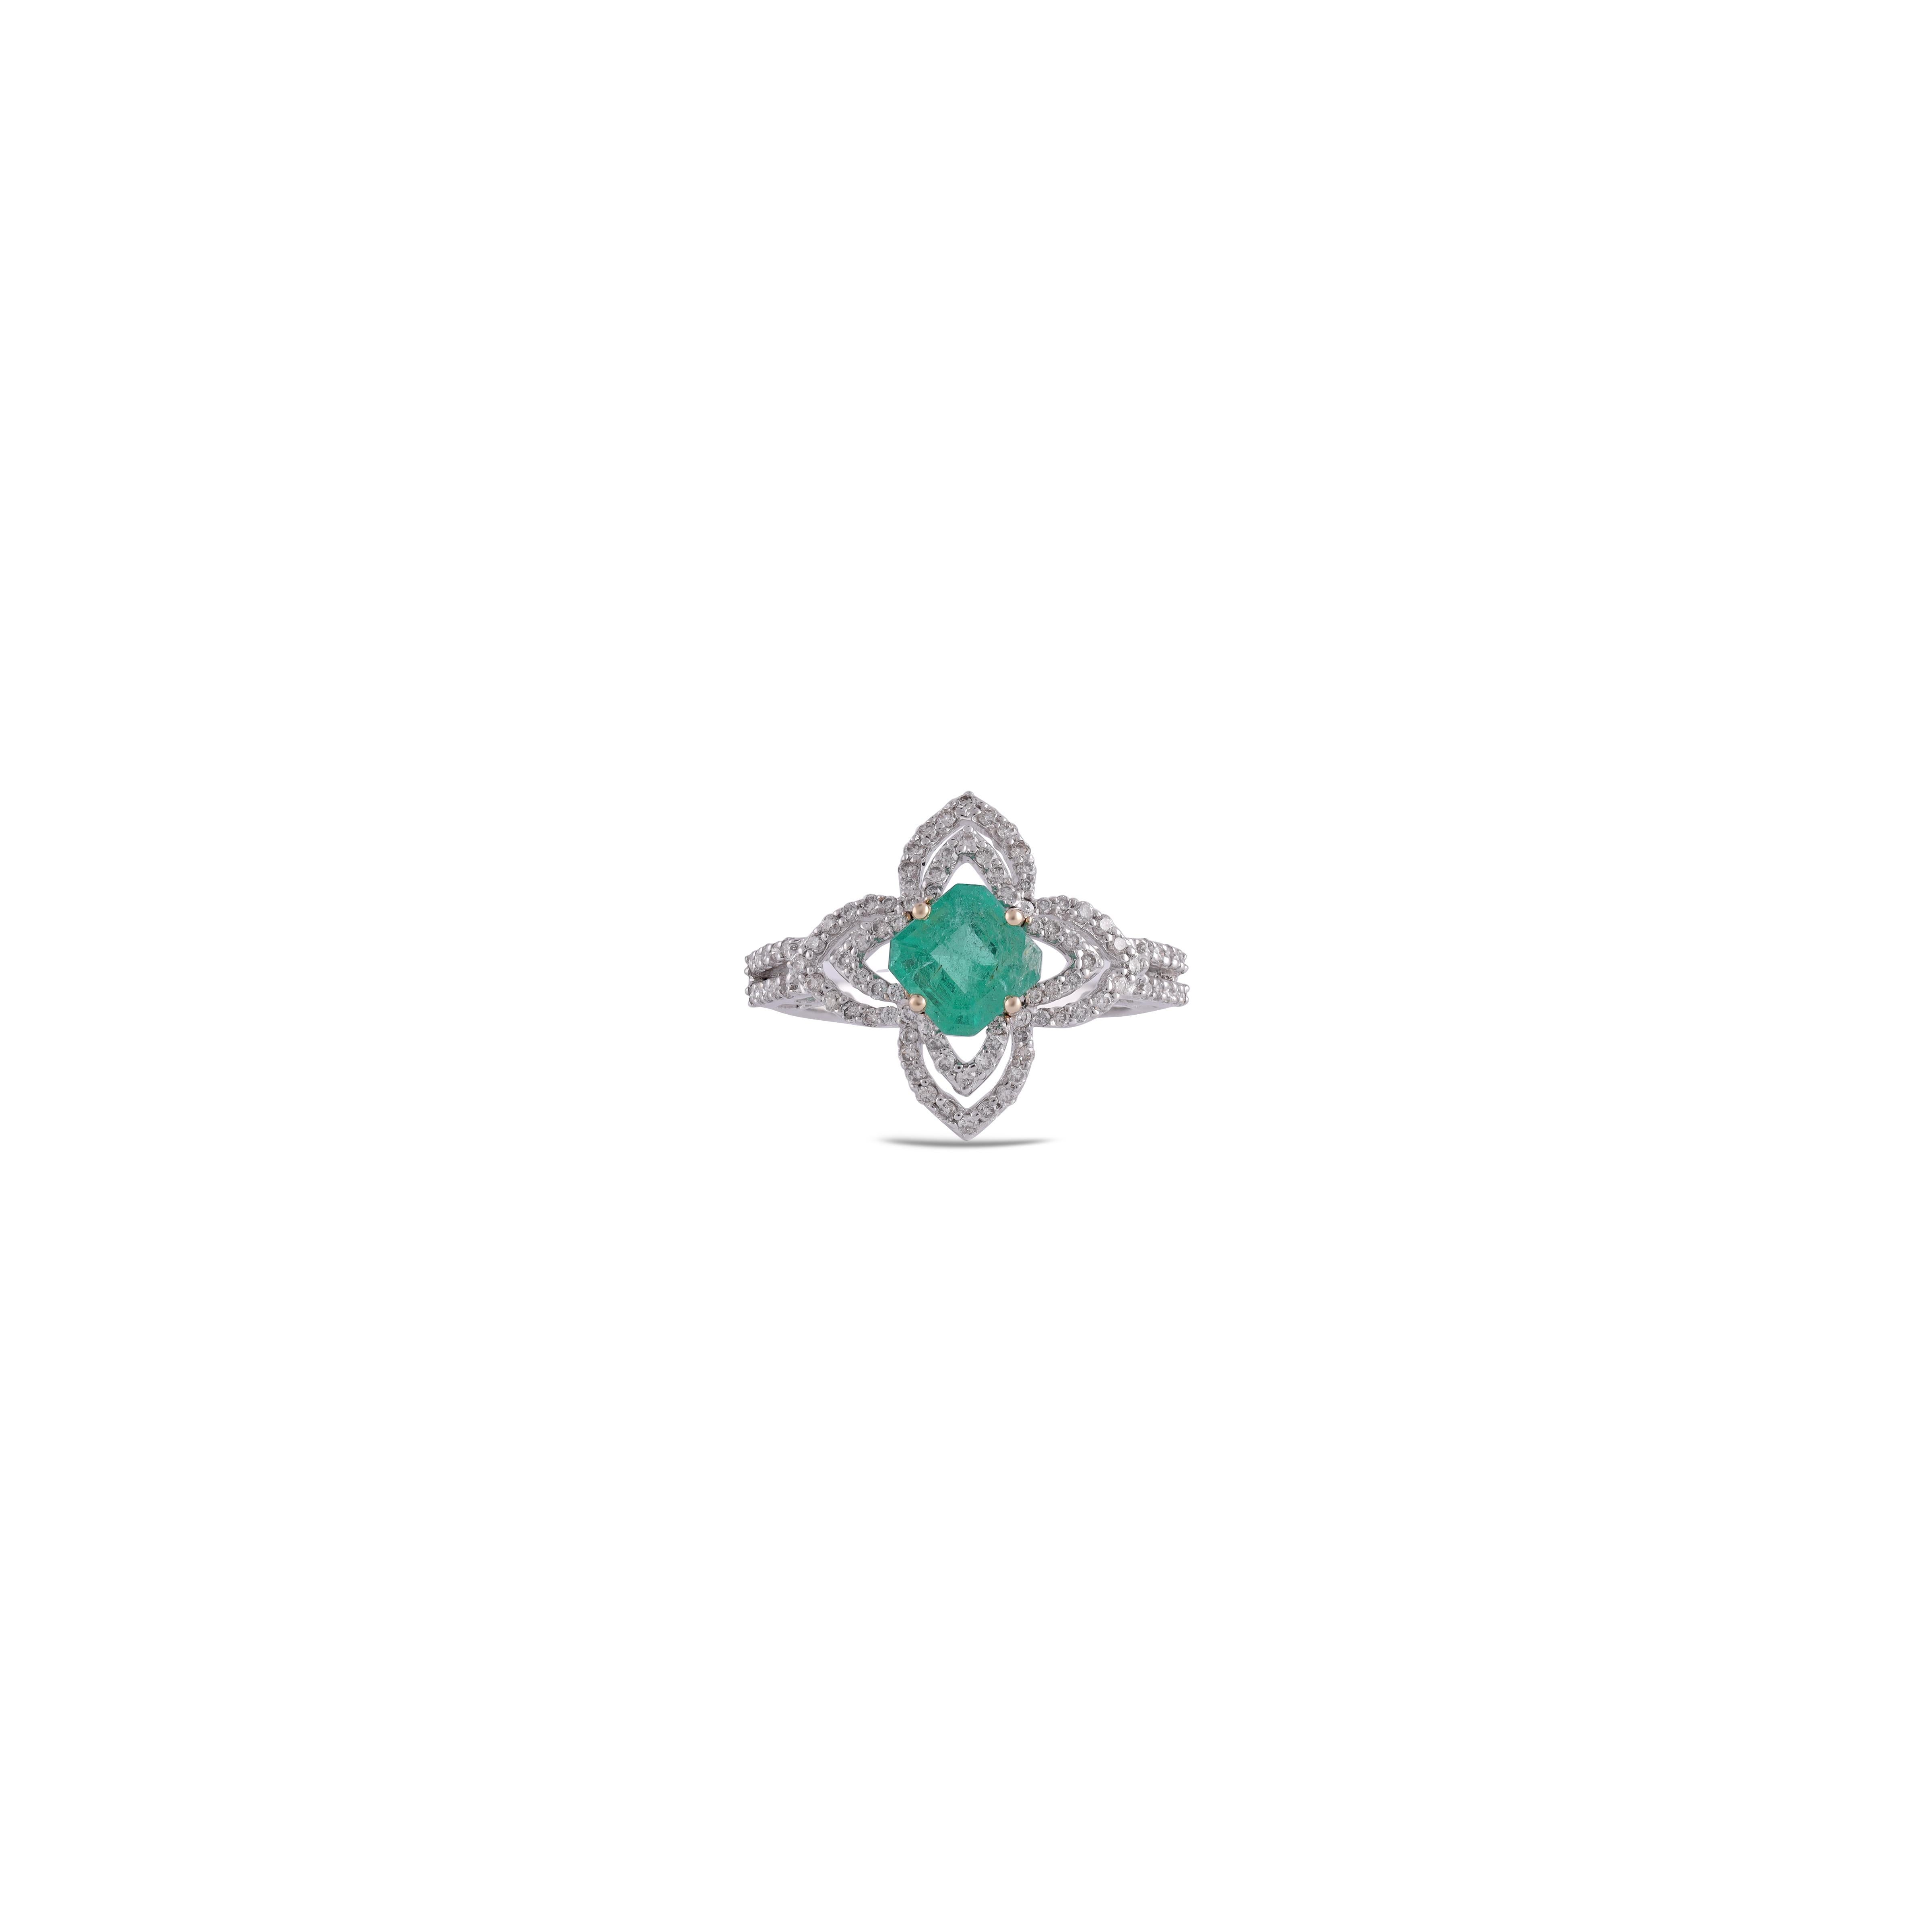 Product Details

→™ Jewelry Type - Rings
→™ Jewelry Main Material - 18K Gold, 18K Gold

Stone Details
→™ Primary Stone Type: Emerald  
→™ Primary Stone Details: Oiled
→™ Primary Stone Count: 1
→™ Total Primary Stone Carat Weight: 1.23